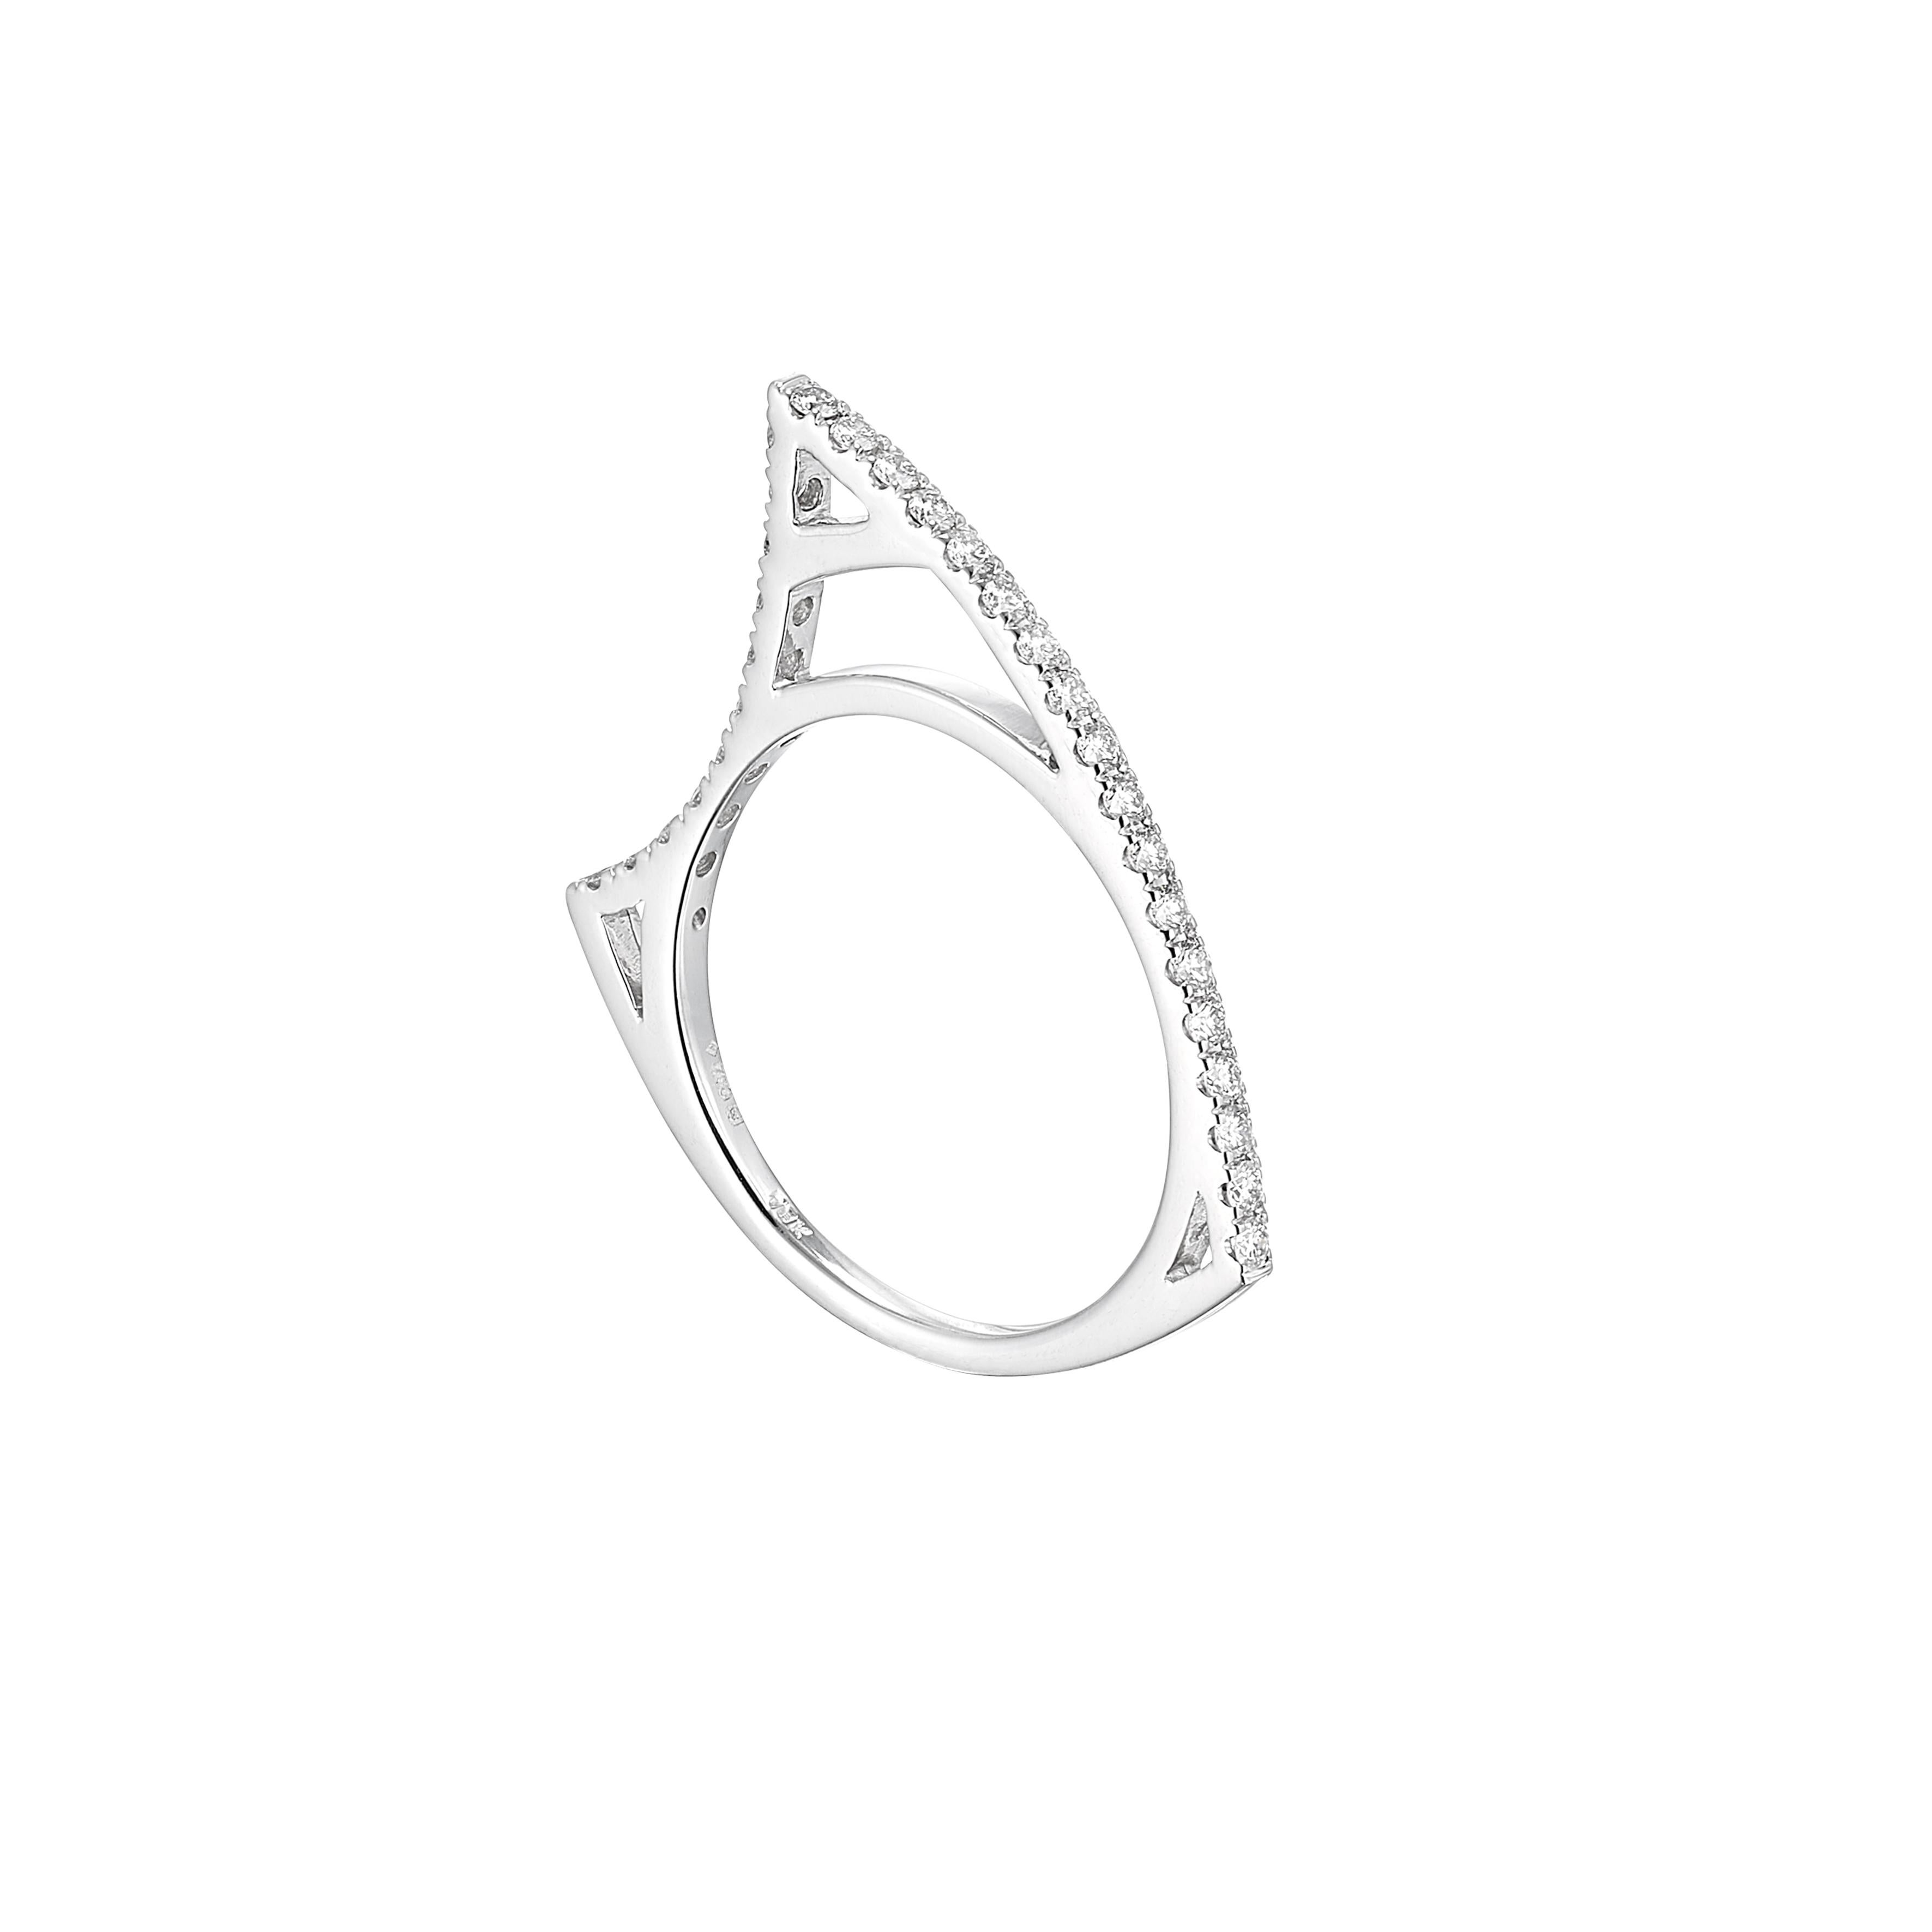 Contemporary Anabela Chan Fine Sustainable Jewelry White Gold Diamond Morpho Ring. 03 For Sale